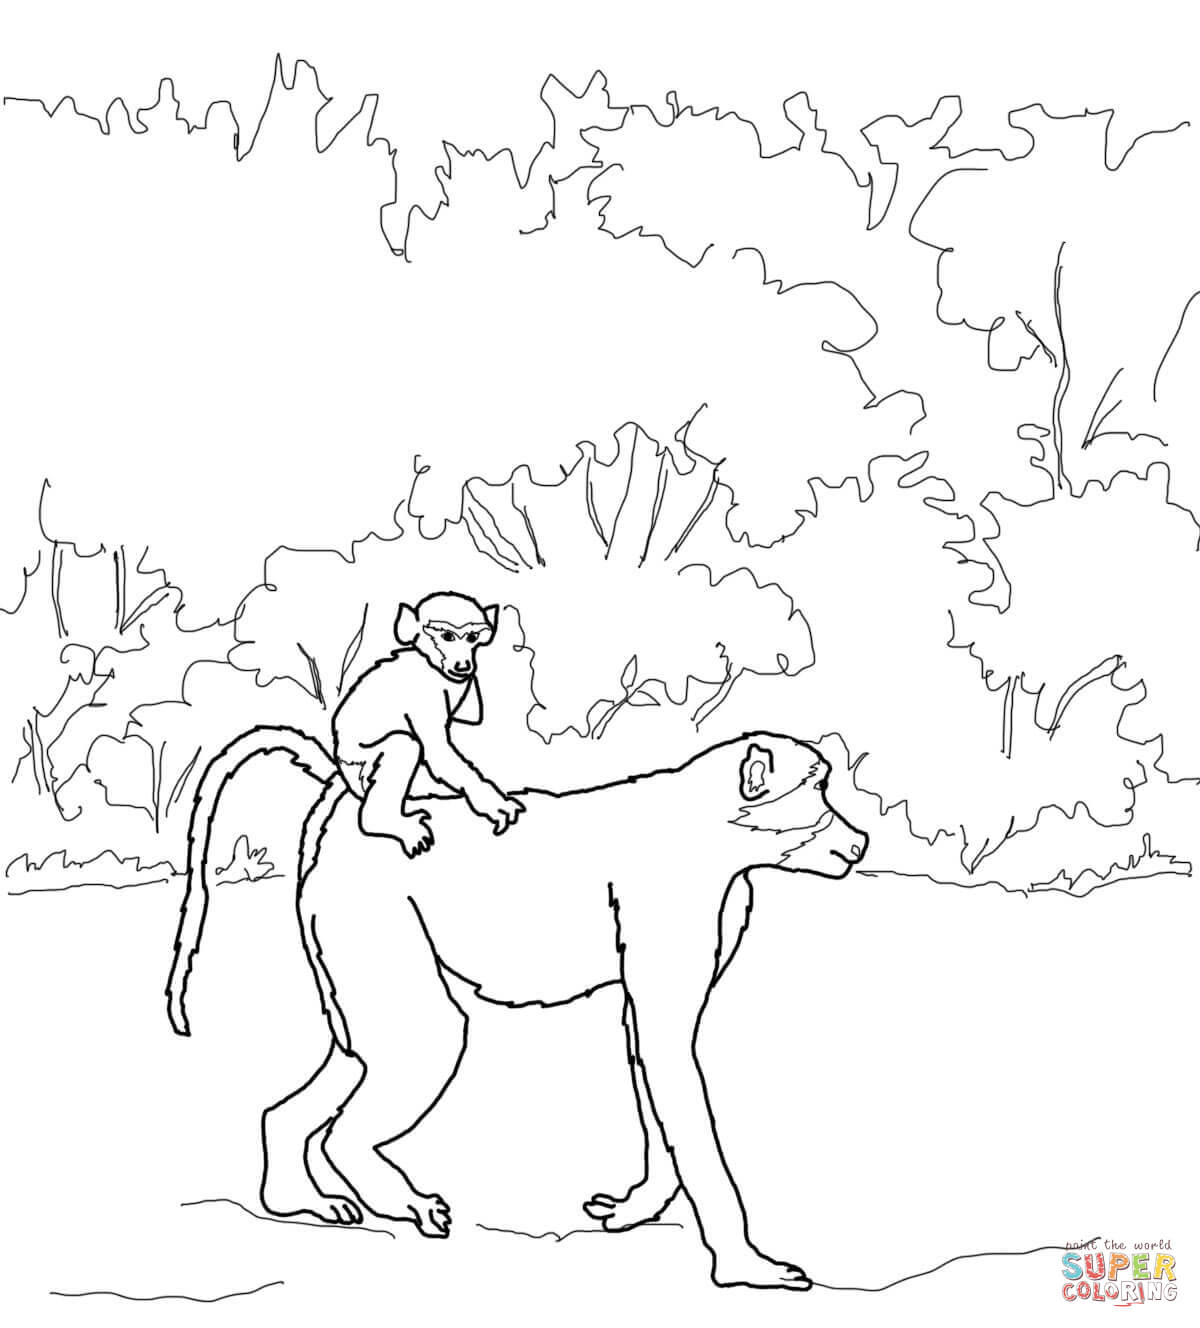 Baboons coloring pages | Free Coloring Pages